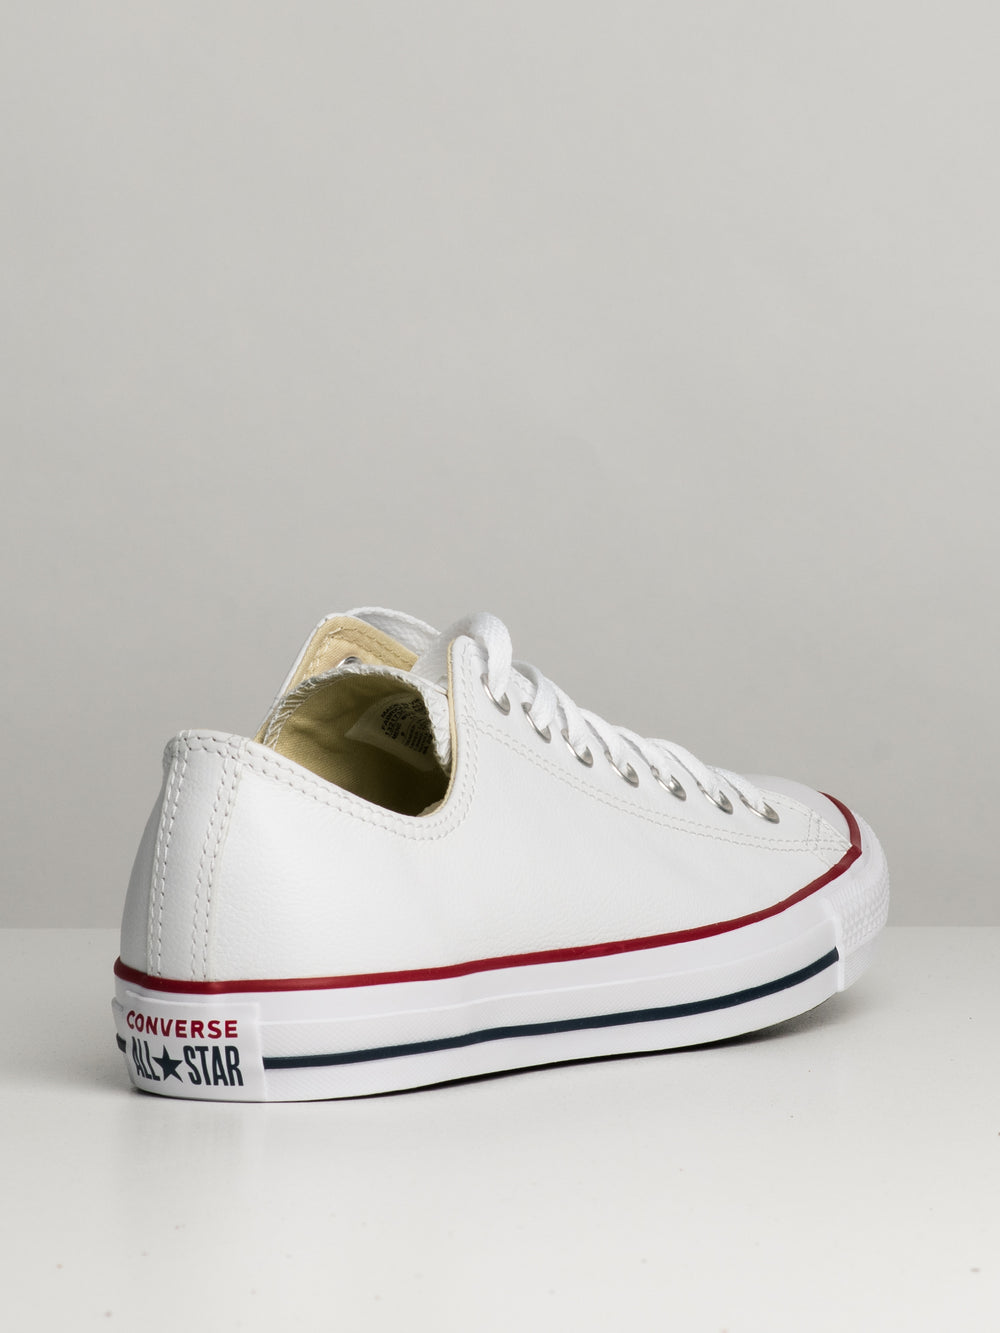 MENS CONVERSE CHUCK TAYLOR ALL STAR LEATHER SNEAKER - CLEARANCE